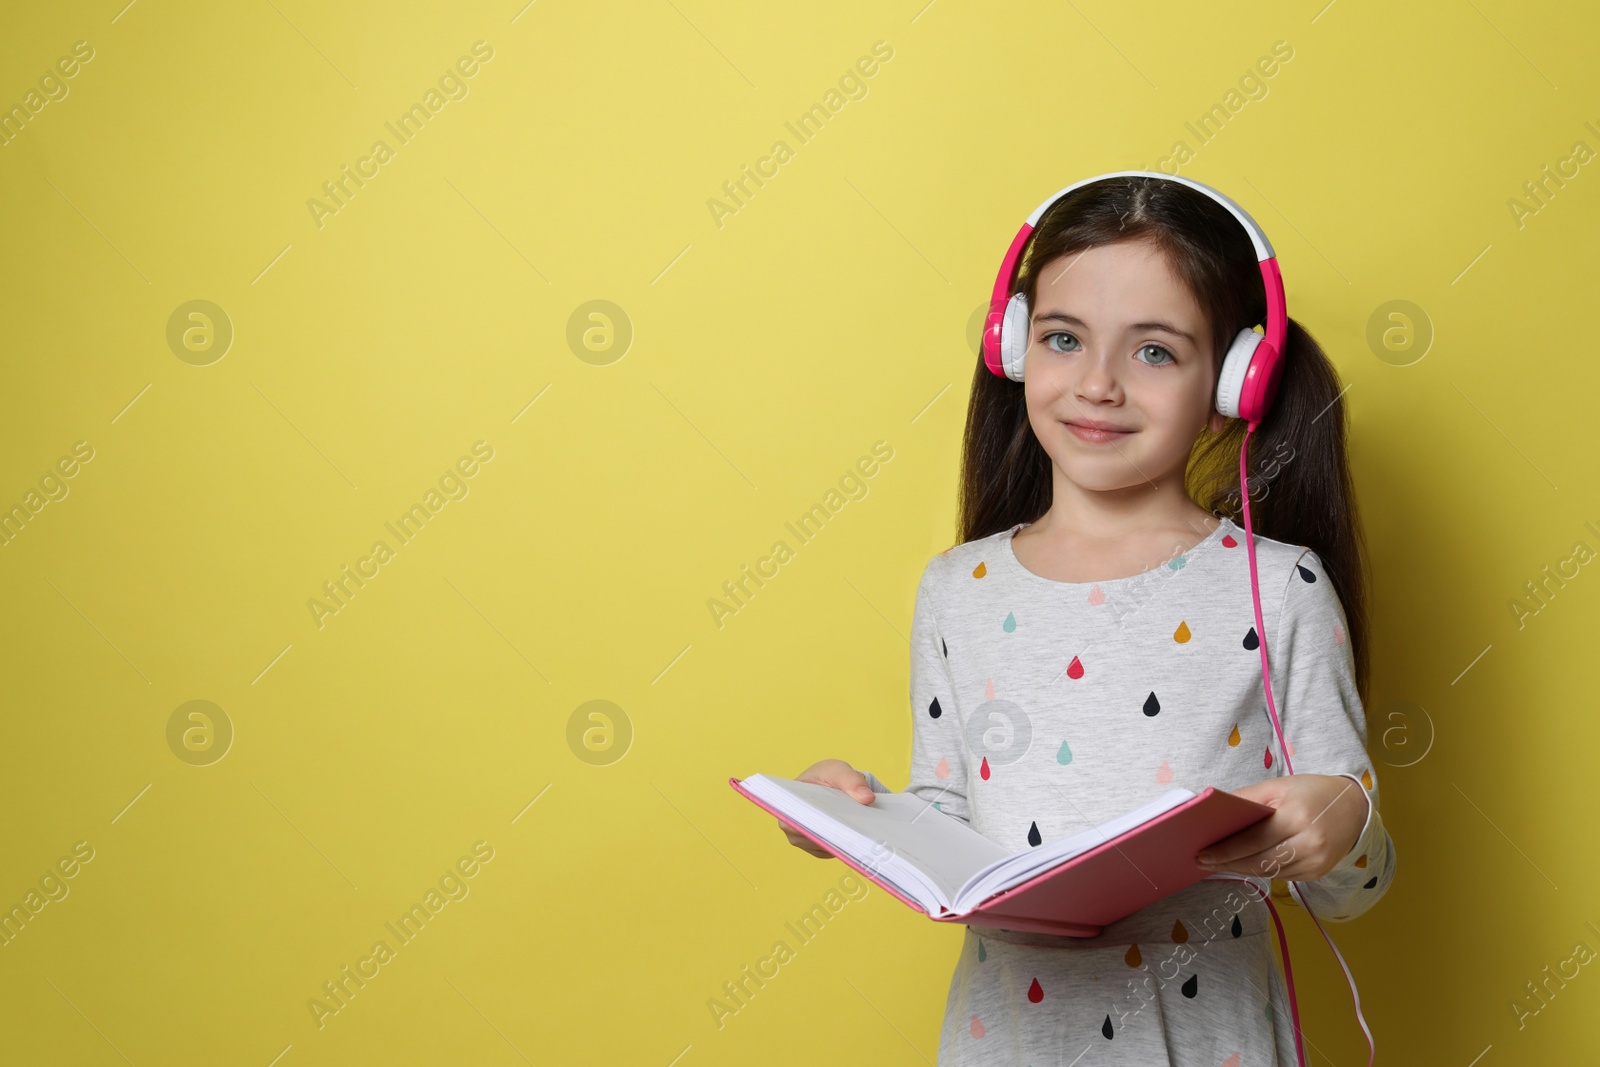 Photo of Cute little girl with headphones listening to audiobook on yellow background. Space for text